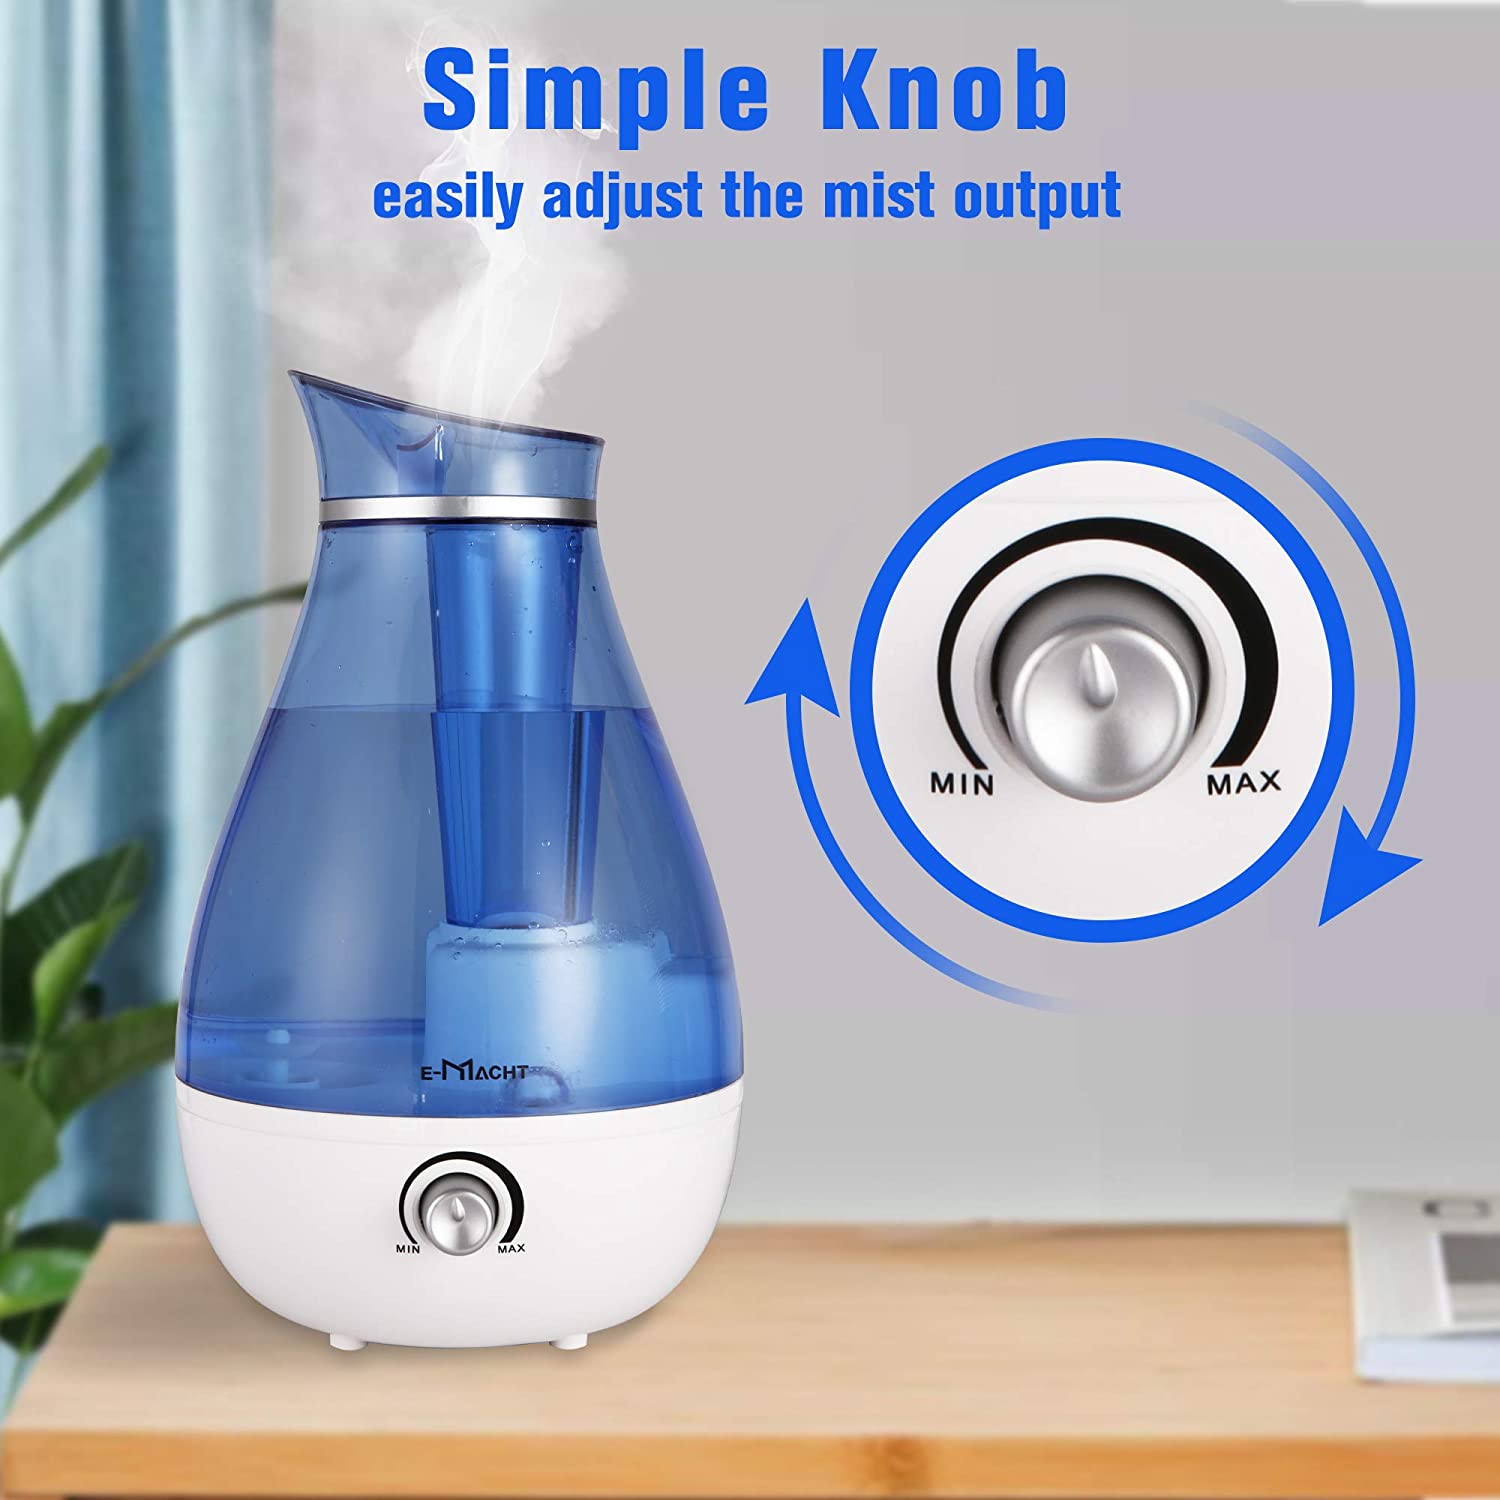 Humidifiers for Bedroom Quiet Ultrasonic Cool Mist Humidifier 2.5L with Auto Shut-Off, Night Light and Adjustable Mist Output,Less Than 30dB,Blue